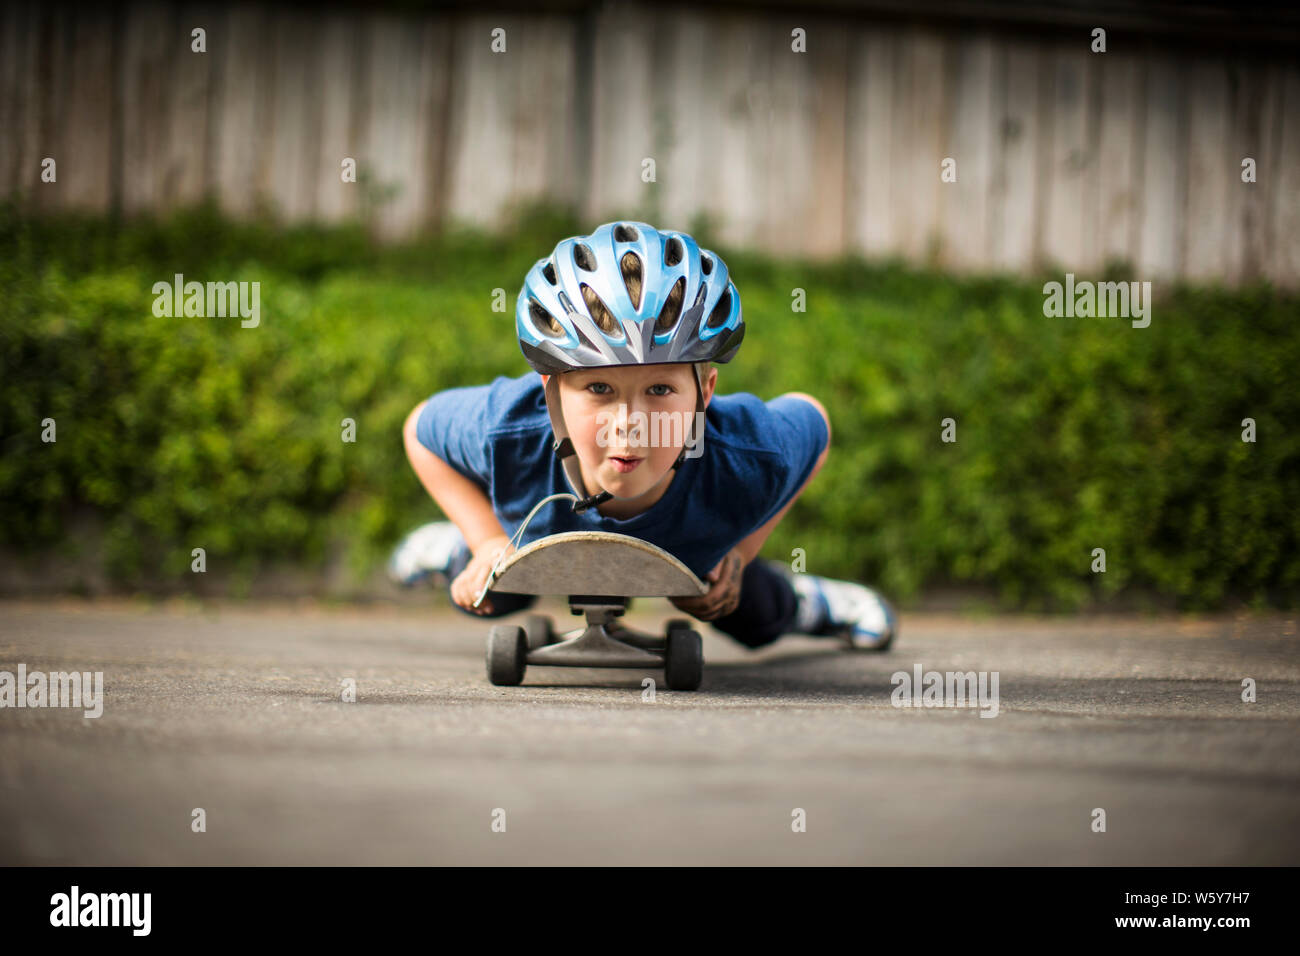 Portrait of a young boy lying down on a skateboard in the driveway Stock  Photo - Alamy